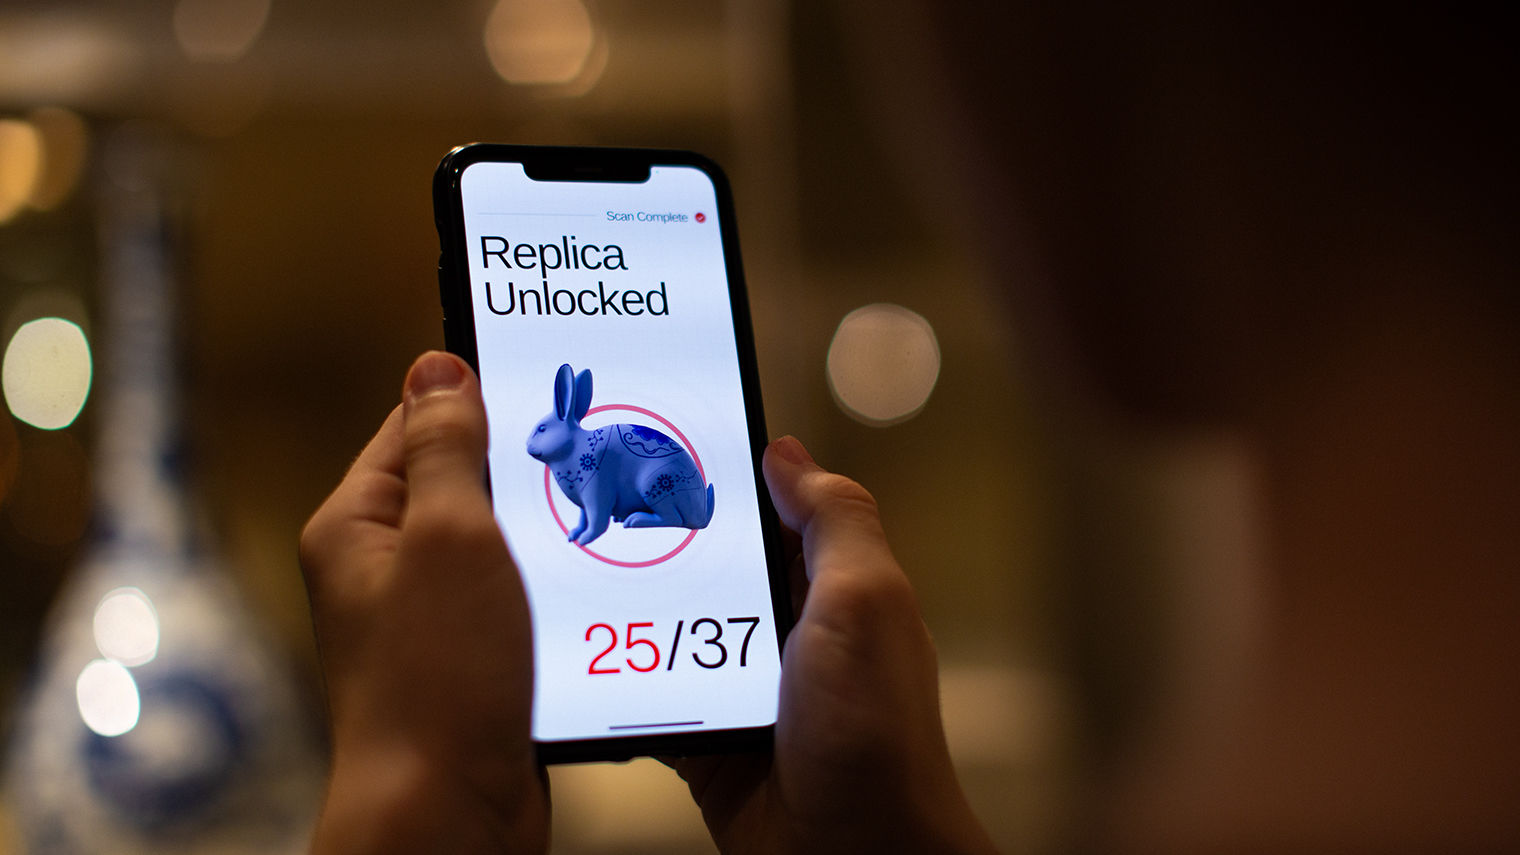 A pair of hands holding a phone and on screen showing a rabbit and the words Replica Unlocked 25/37